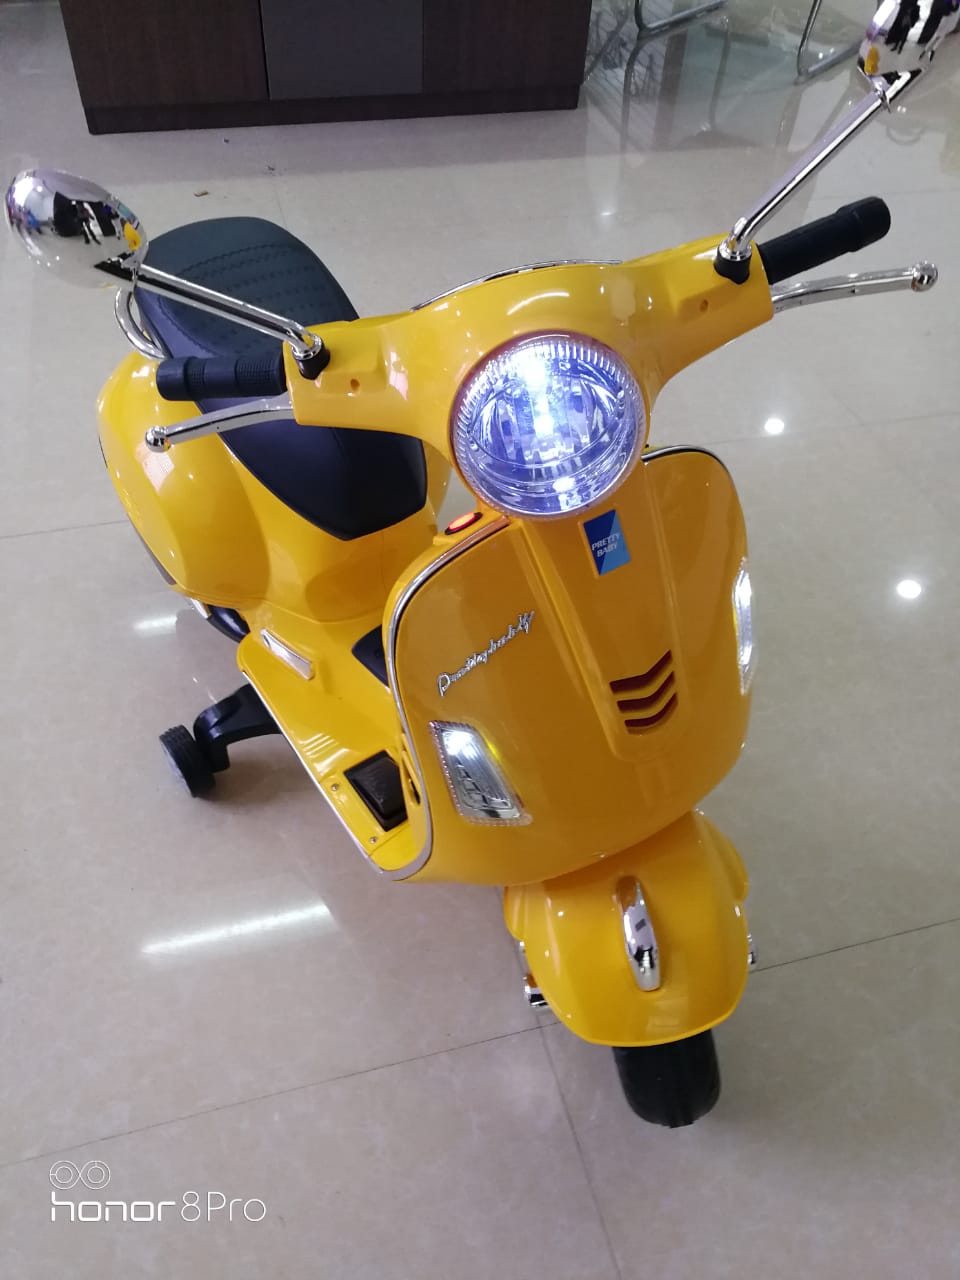 Baby vespa scooter for kids | made in india | Vespa Battery Operated Ride on Bike with MP3/USB/TF Music | Sam's Toy World Ahmedabad - samstoy.in